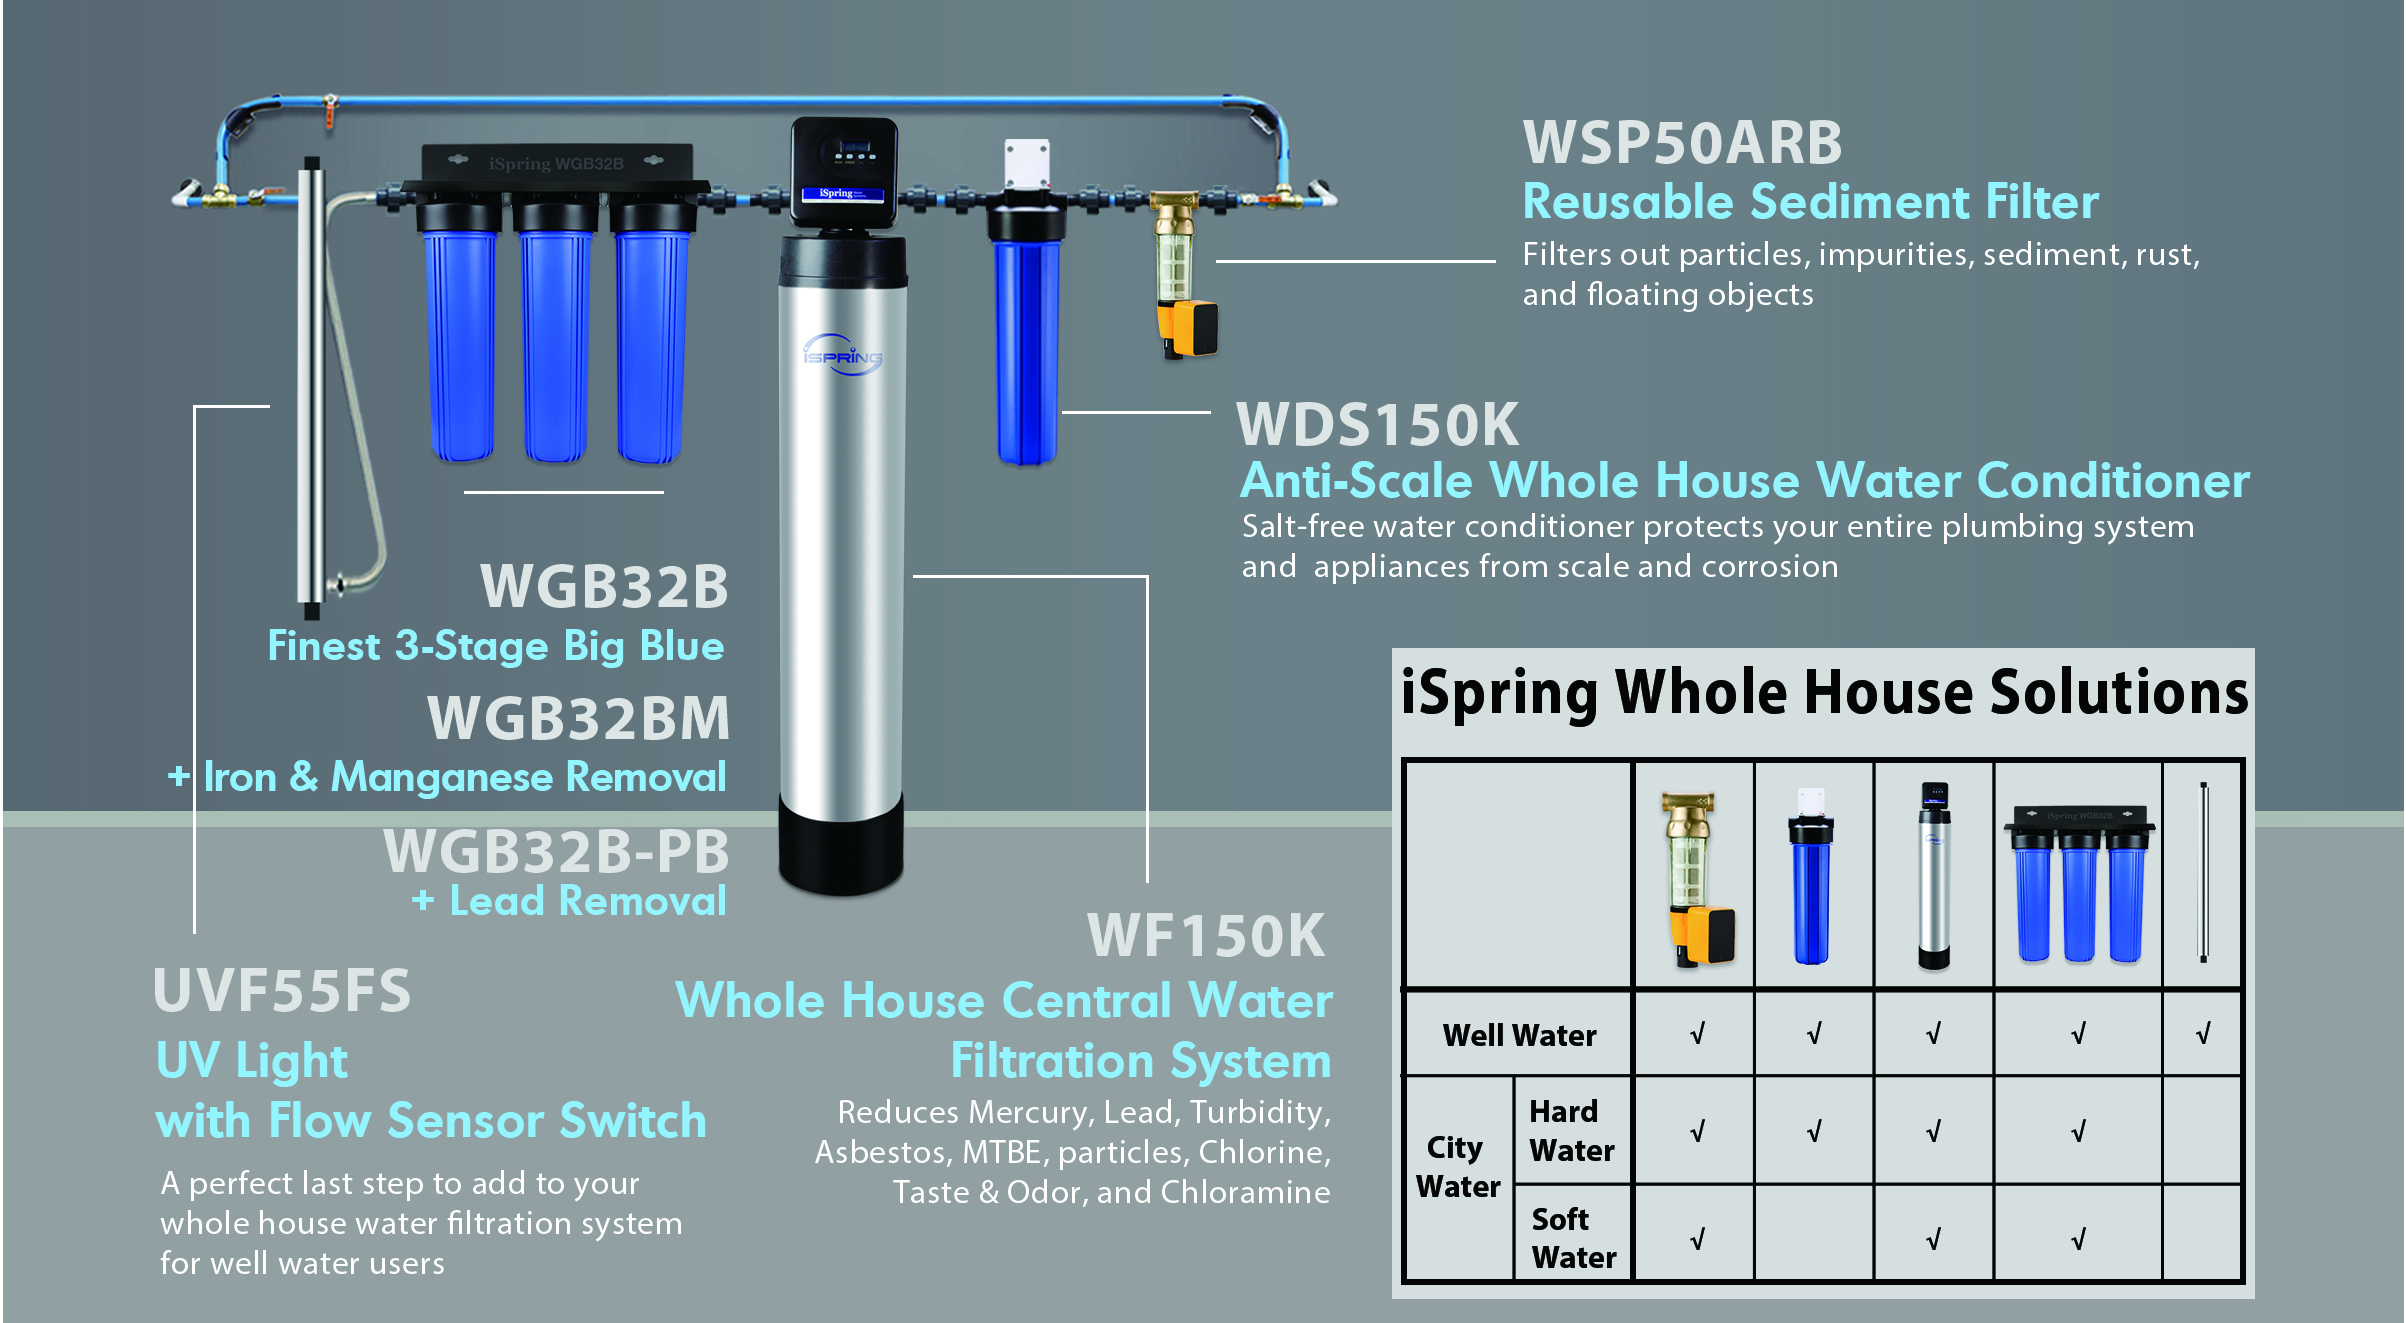 Drinking Water Filter System